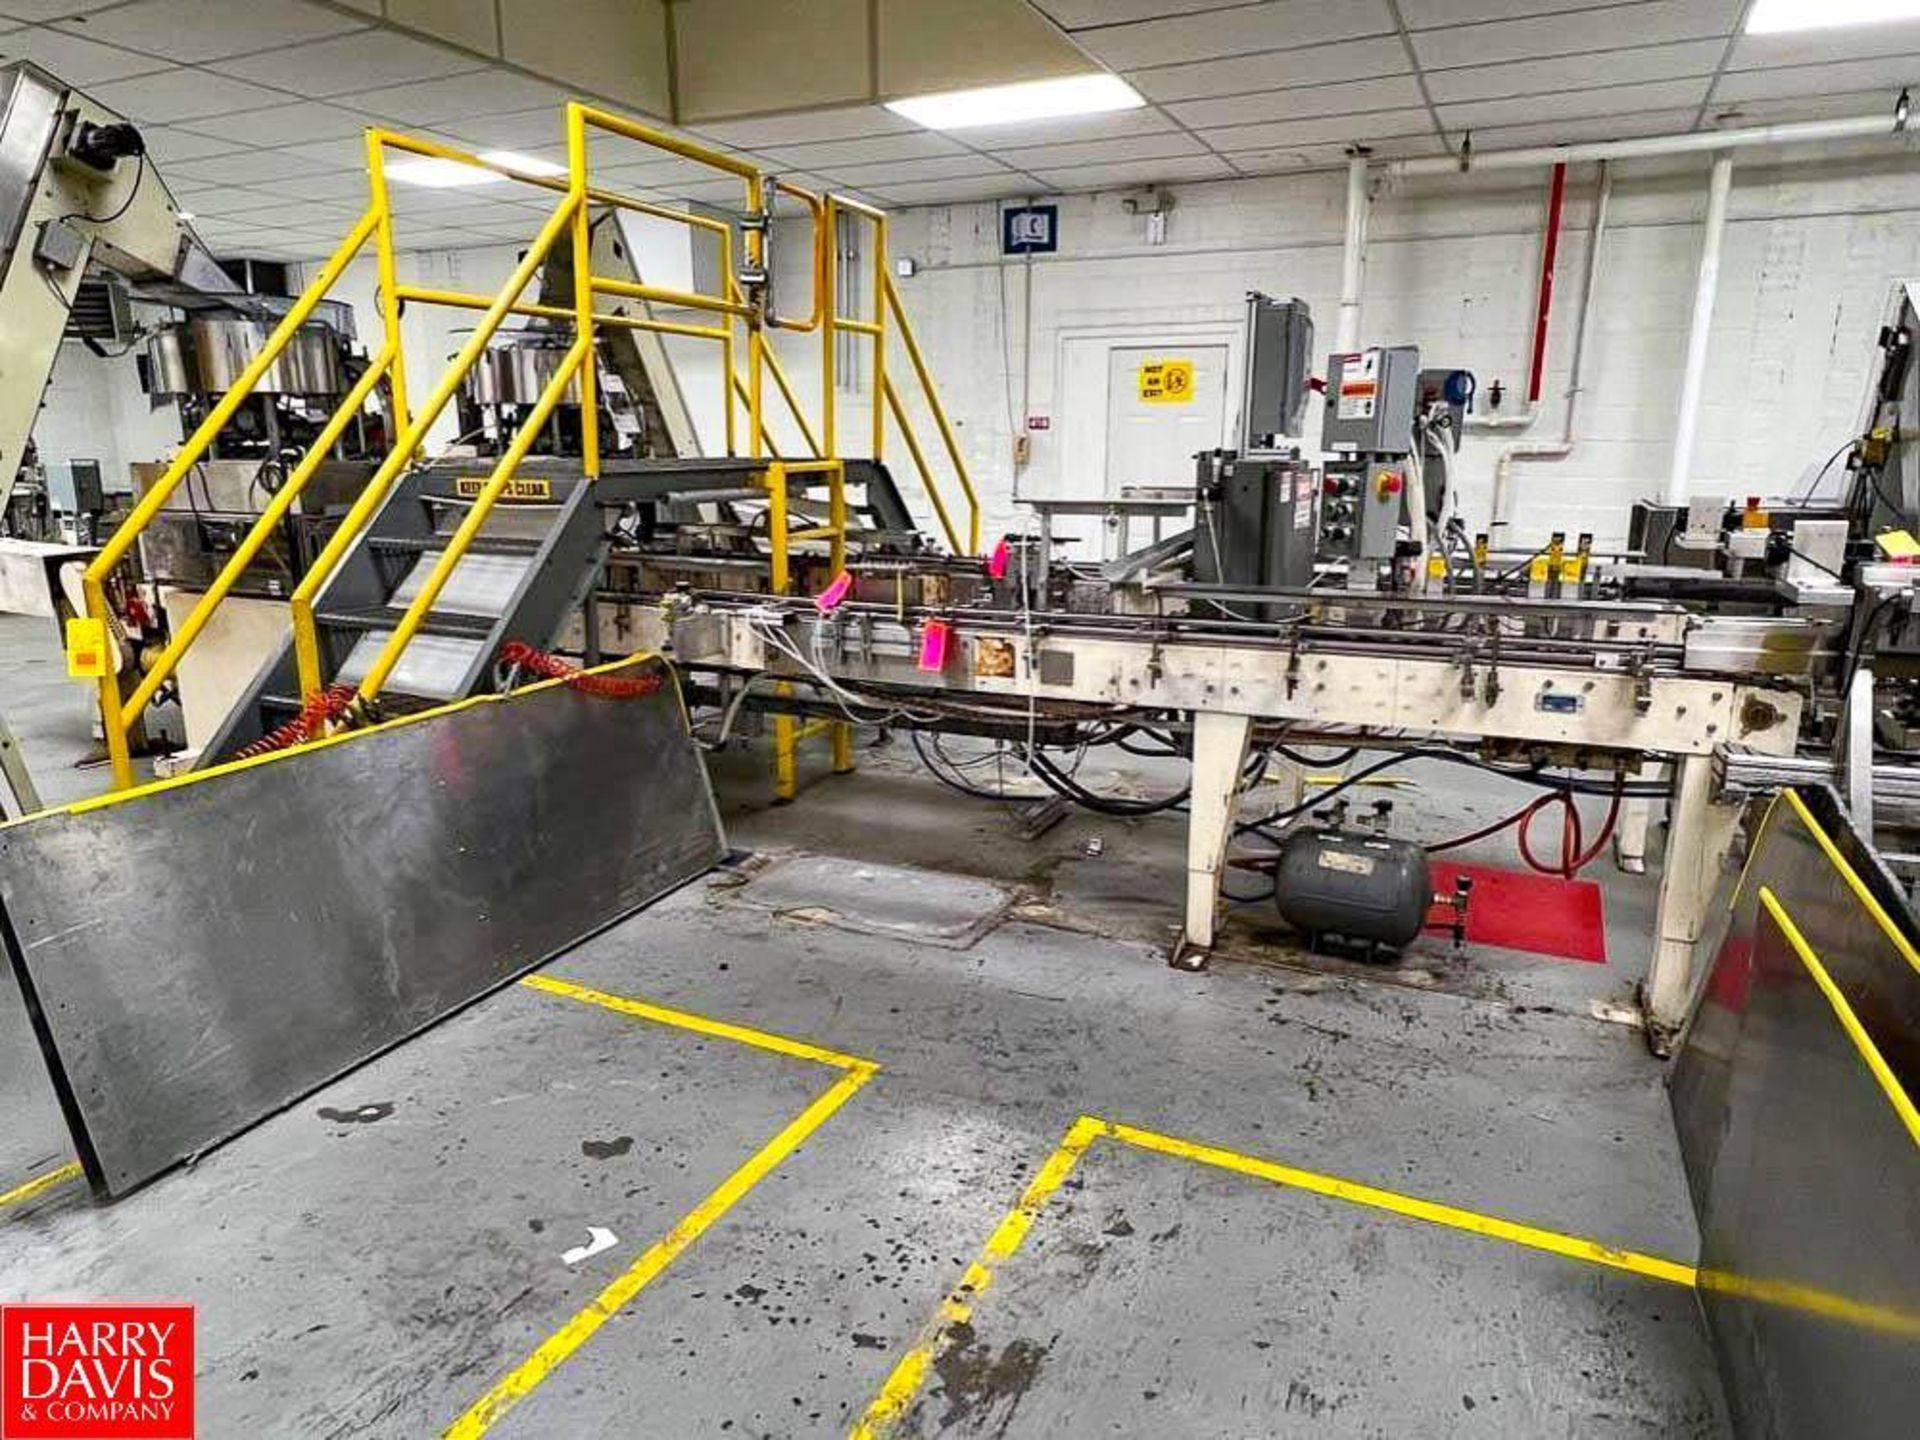 Conveyor with S/S Inline Filler Station Head and Drive, Dimensions = 21' x 4.5" (Subject to Bulk Bid